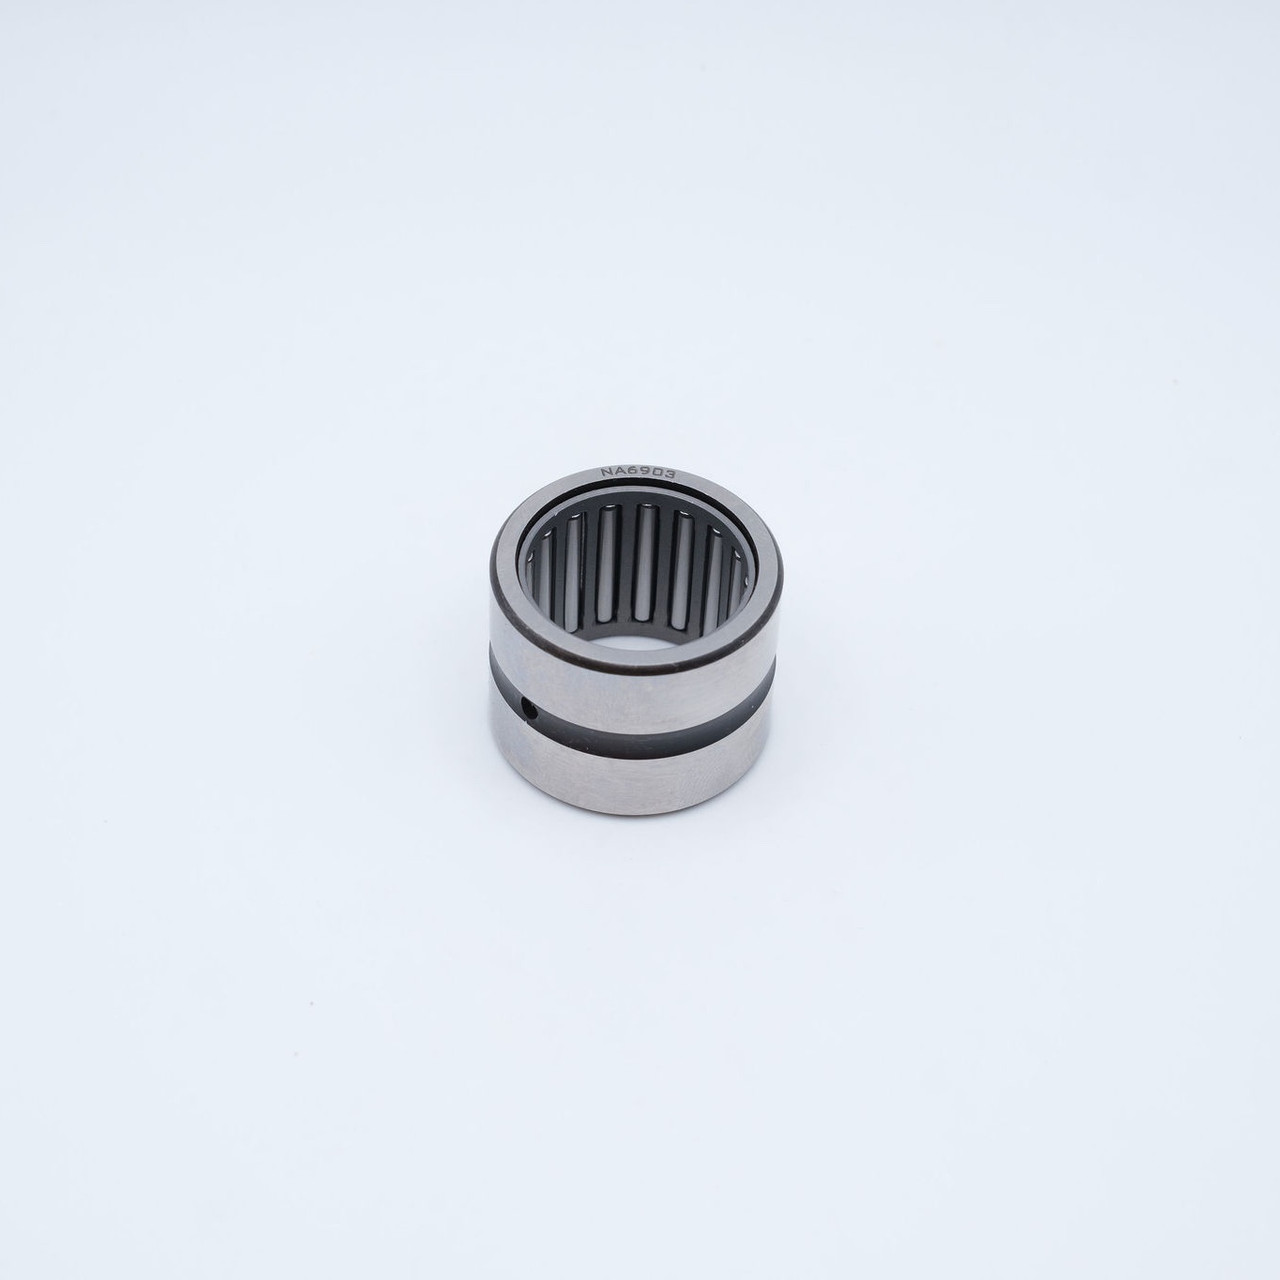 RNA6908 Machined Needle Roller 48x62x40 Front View